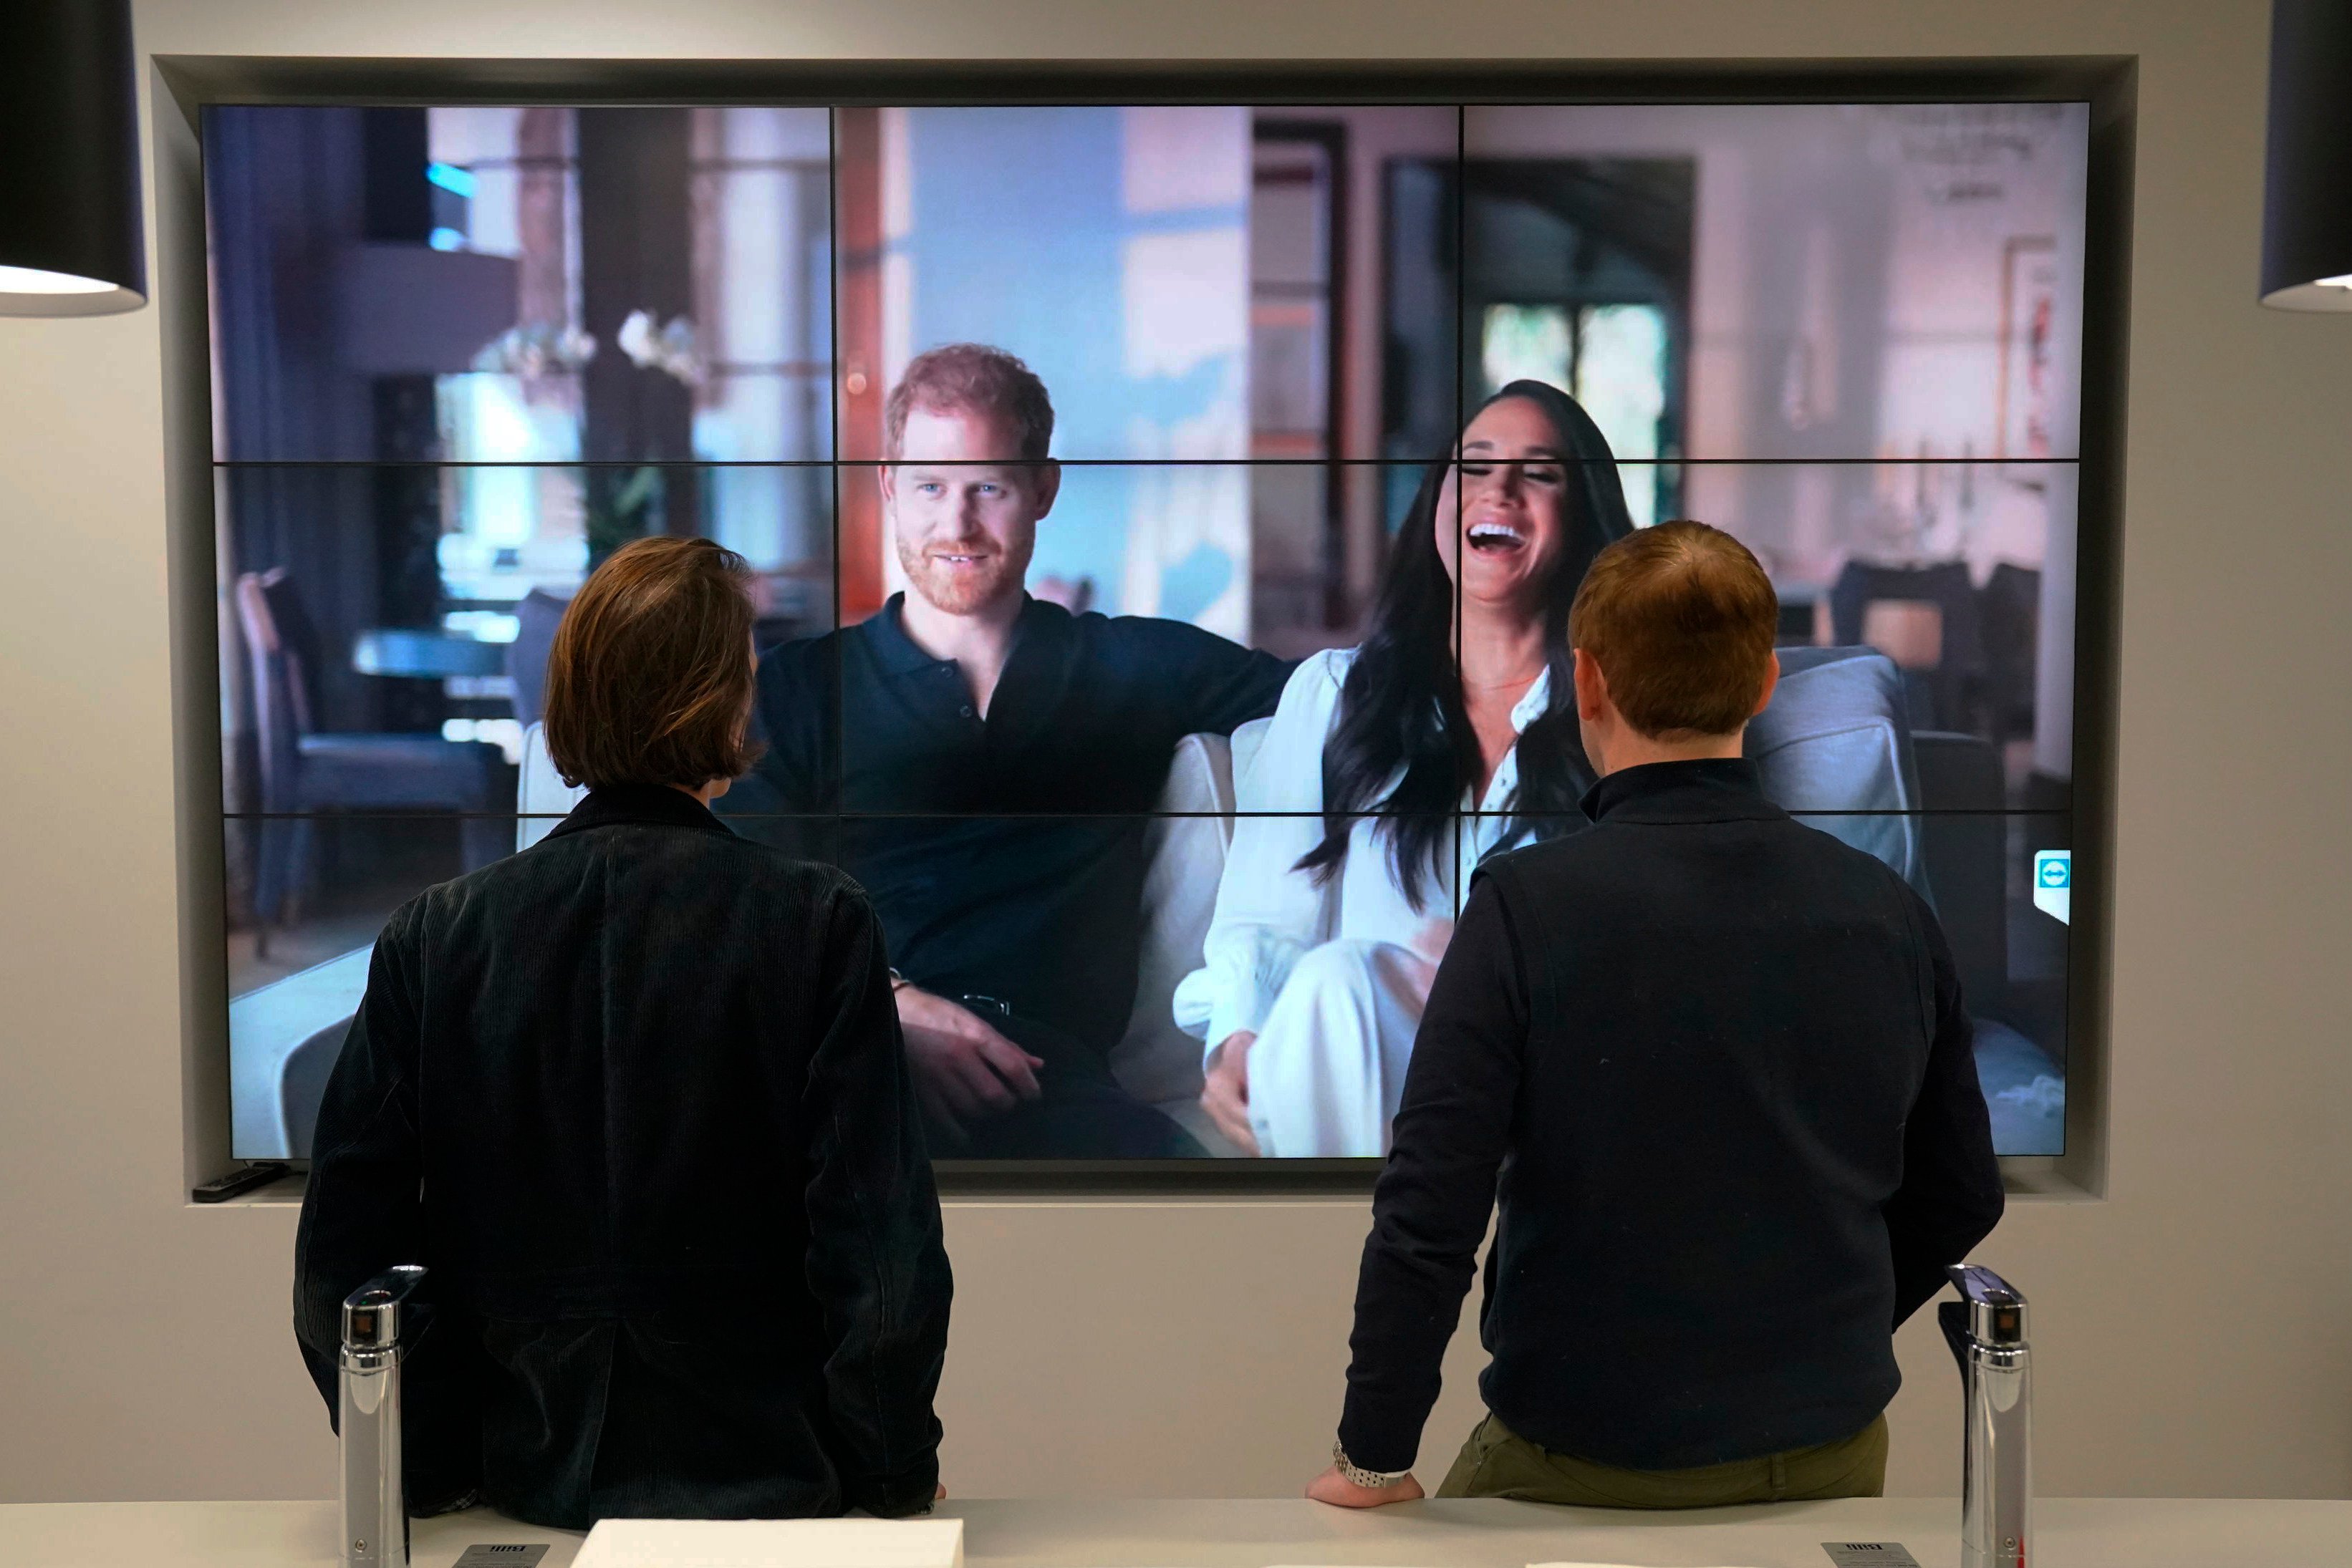 Office workers in London watch Prince Harry and Meghan Markle, the Duke and Duchess of Sussex’s controversial documentary being aired on Netflix, on December 8. Photo: AP